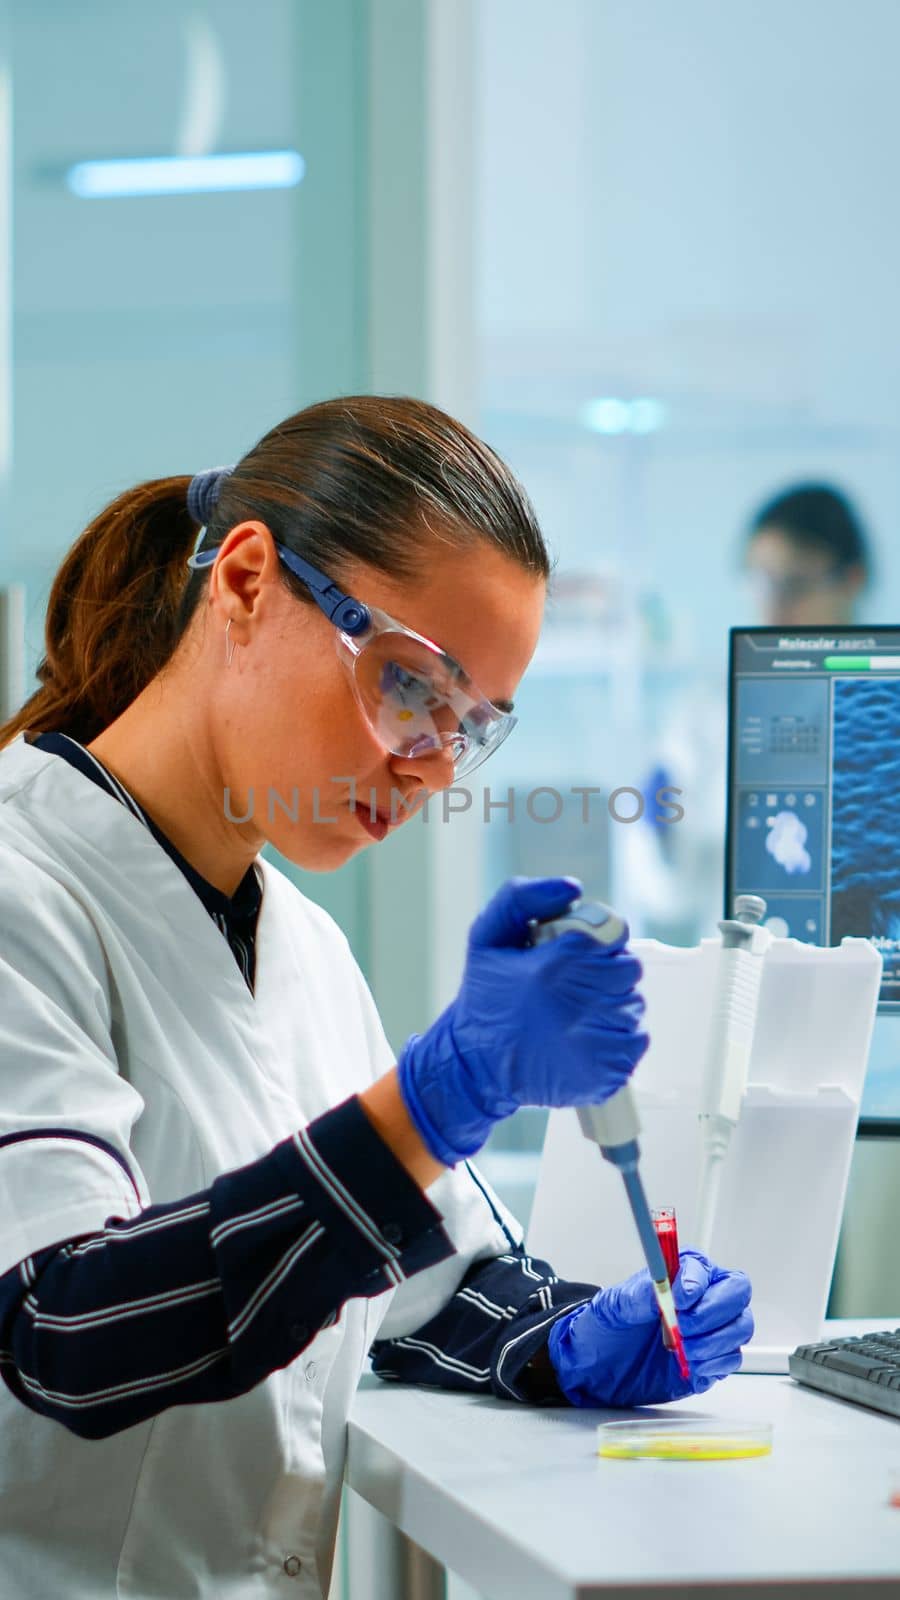 Scientist in modern equipped medical laboratory examinining drug discovery with micropipette. Medical stuff examining vaccine evolution using high tech and technology researching treatment, development against covid19